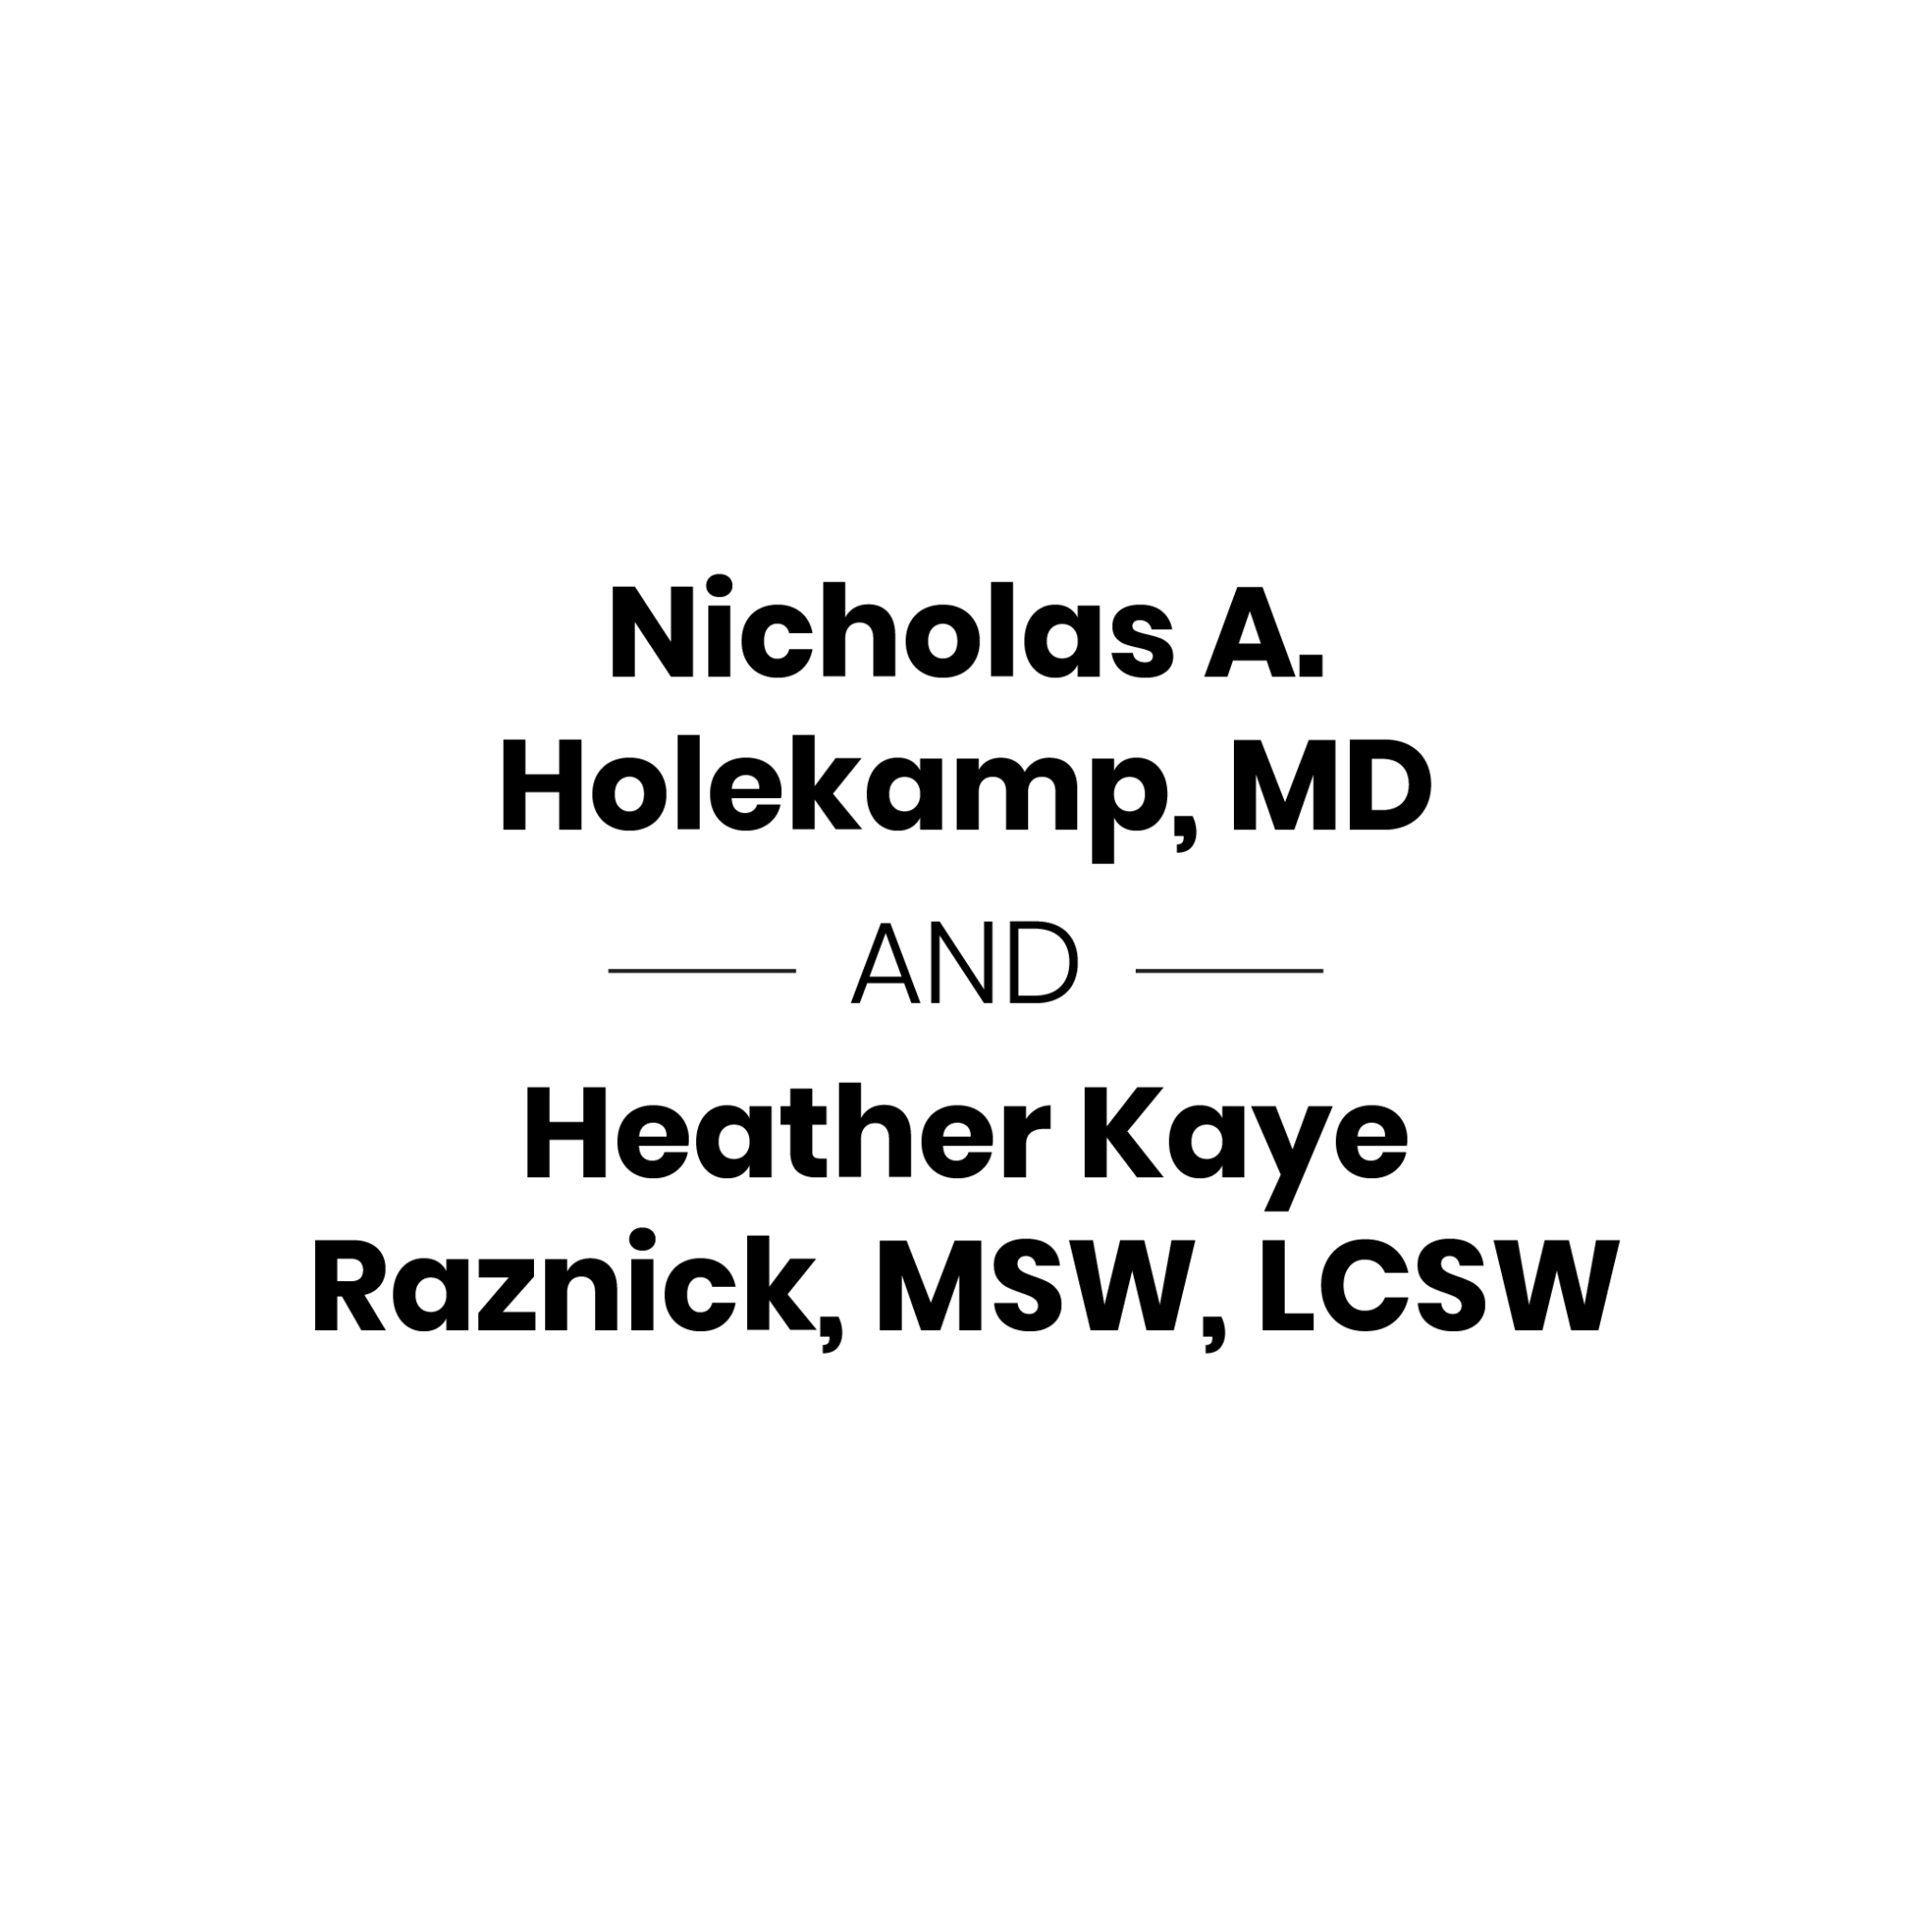 Nicholas A. Holekamp, MD and Heather Kaye Raznick, MSW, LCSW